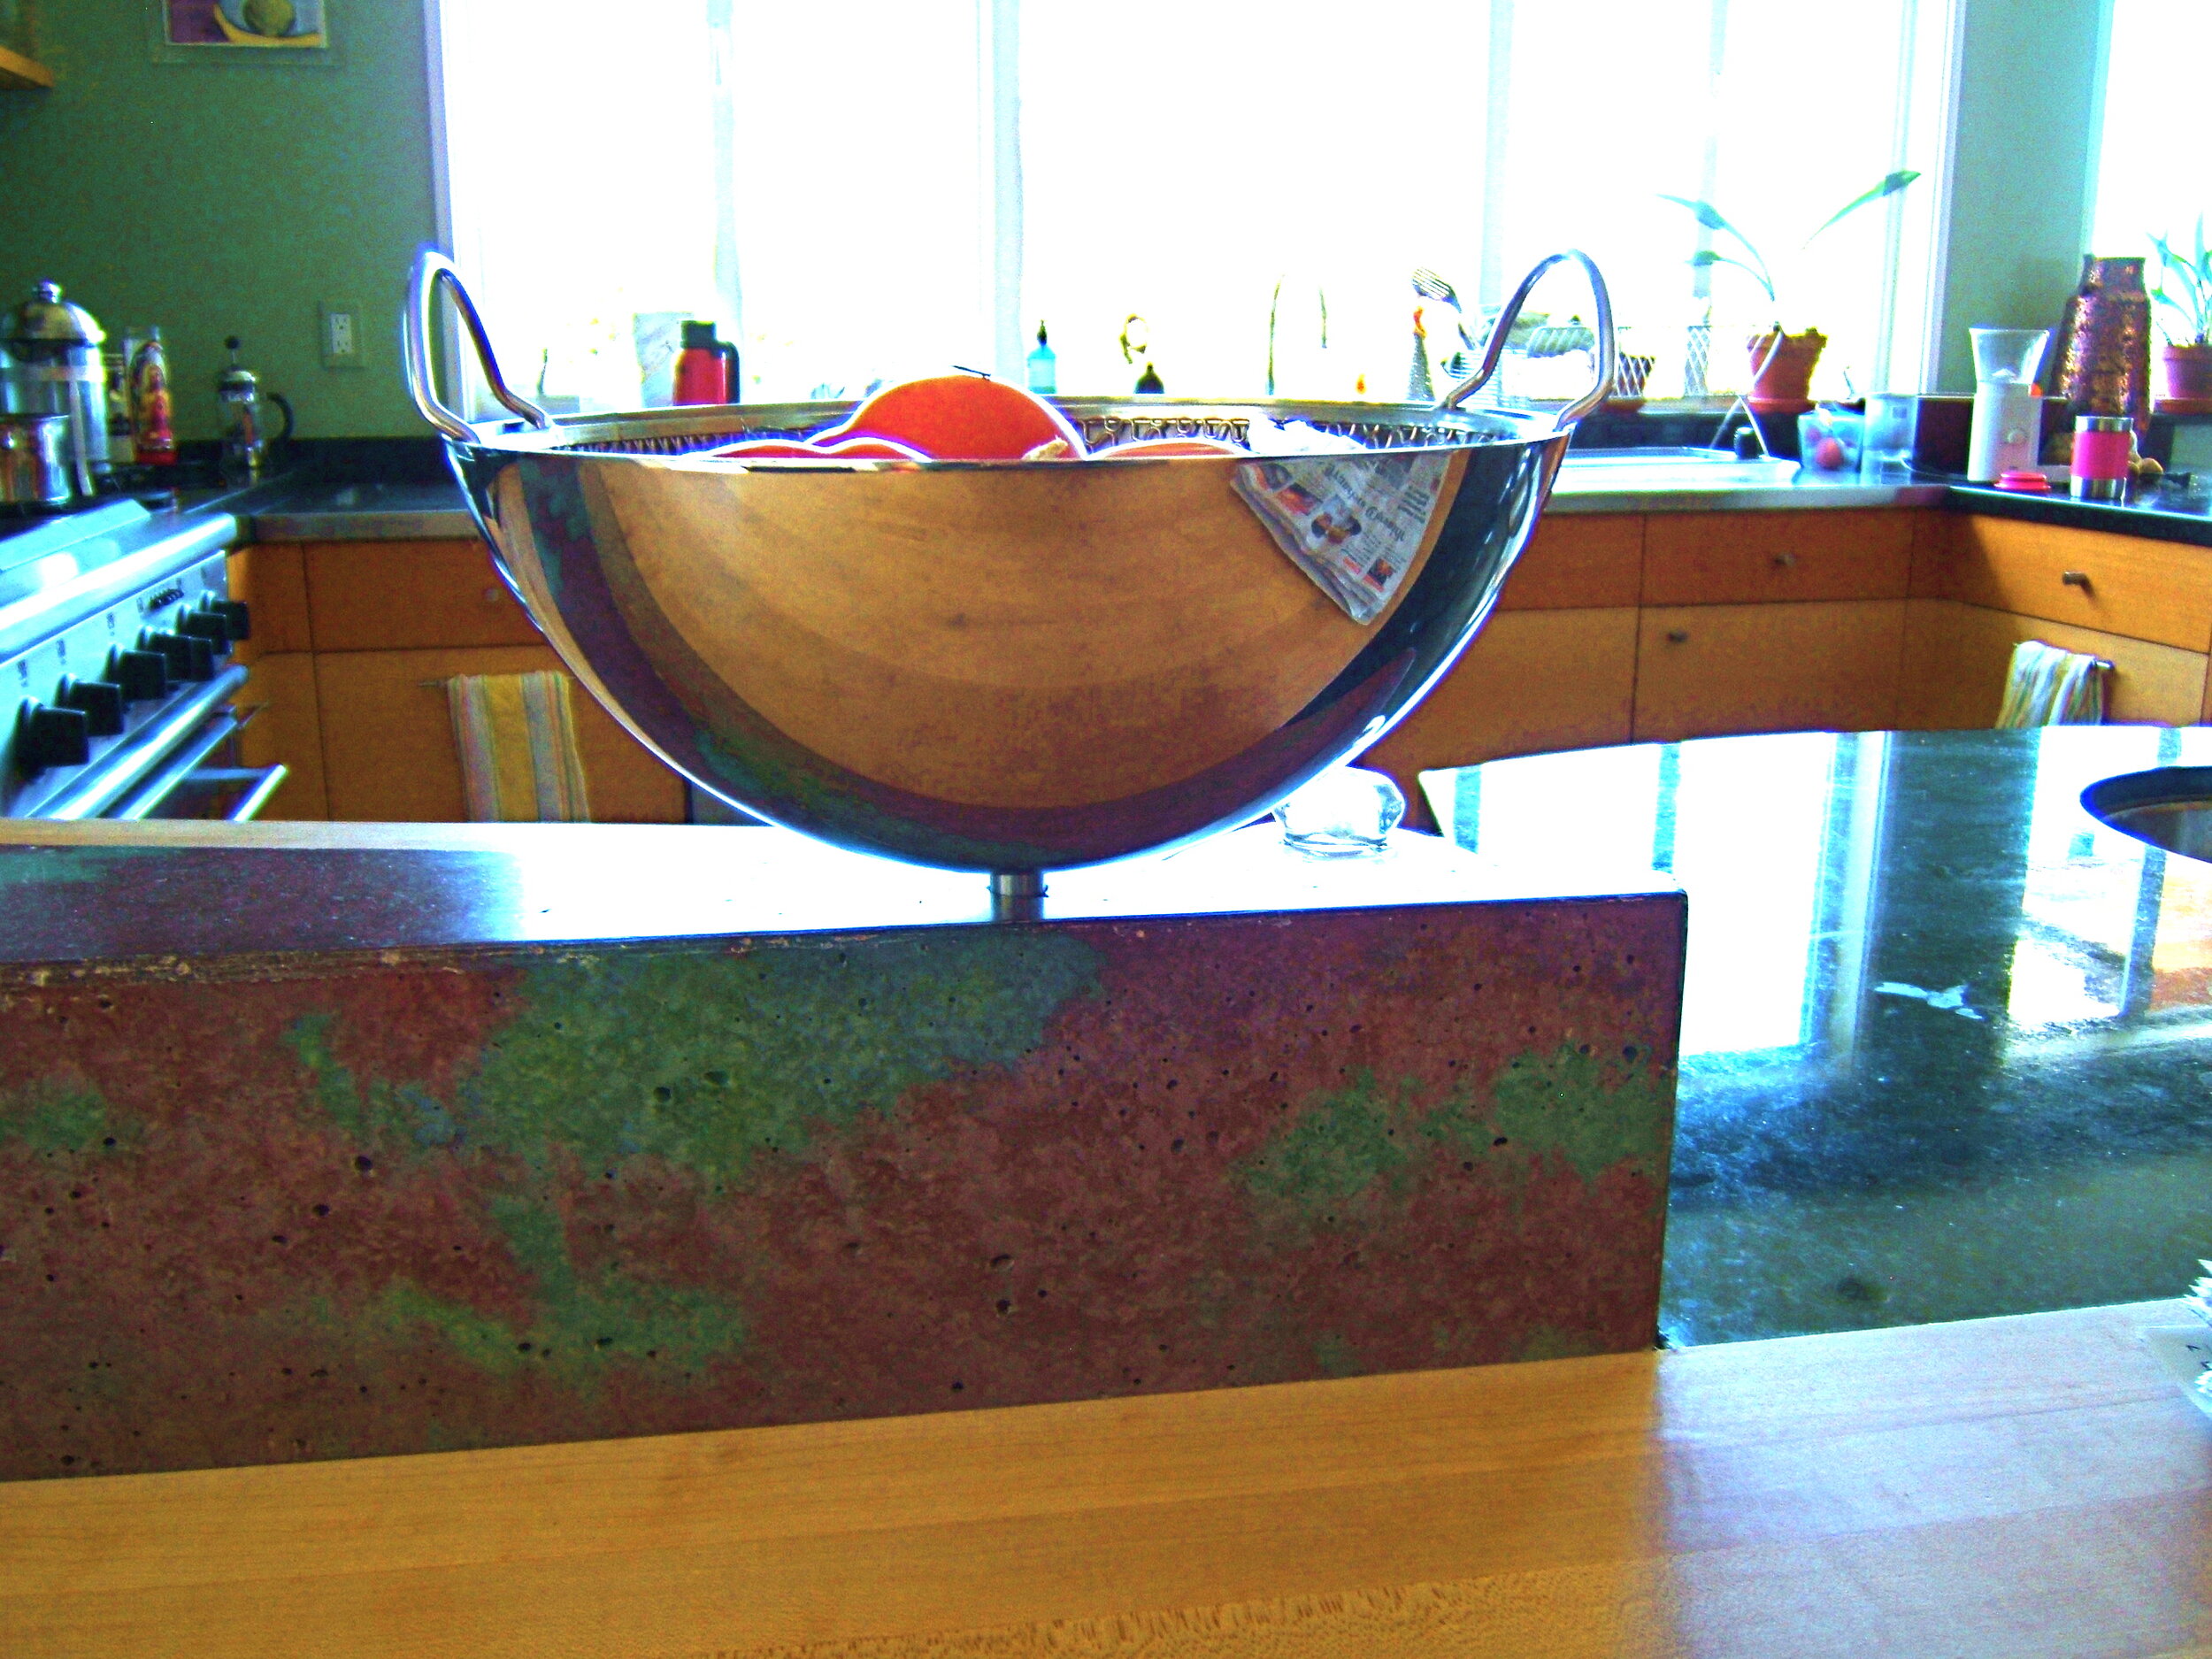 Allessi Fruit Bowl at the Kitchen peninsula counter